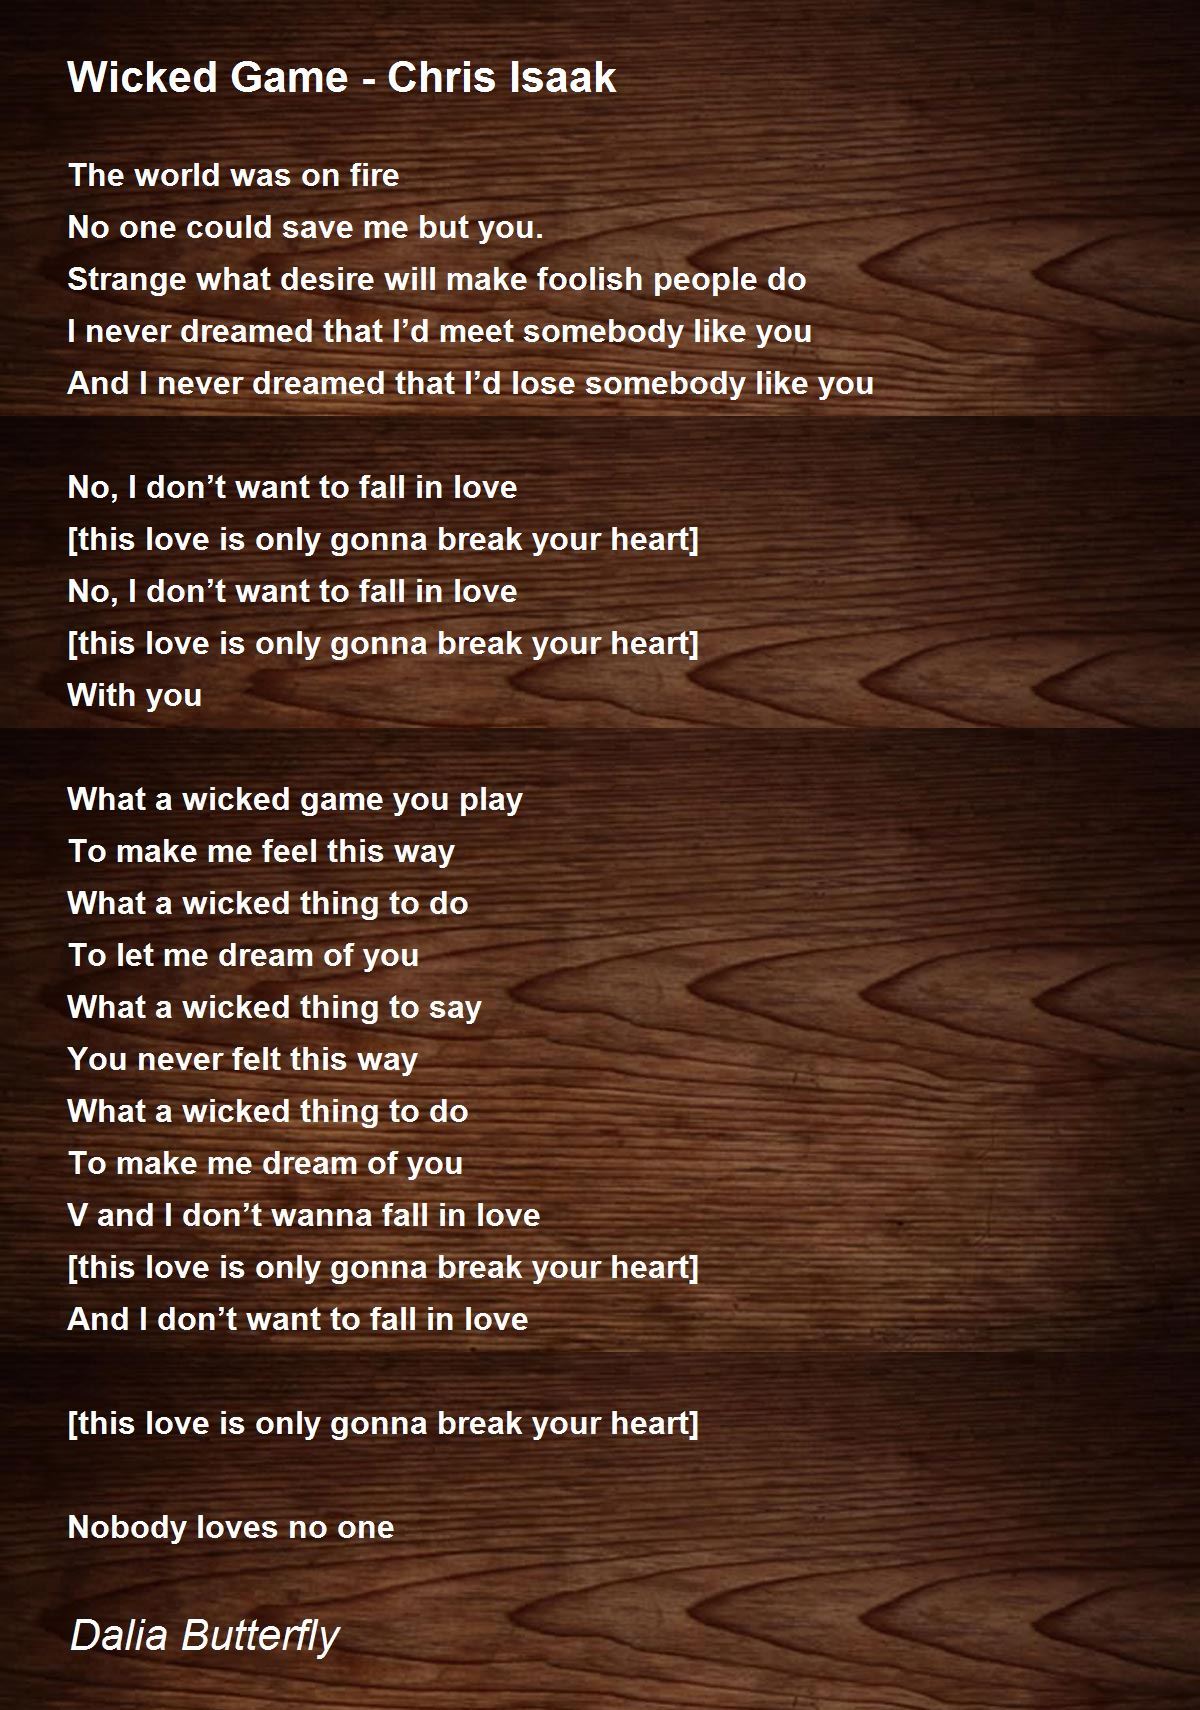 Wicked Game Chris Isaak  Wicked game, Lyrics to live by, Chris isaak